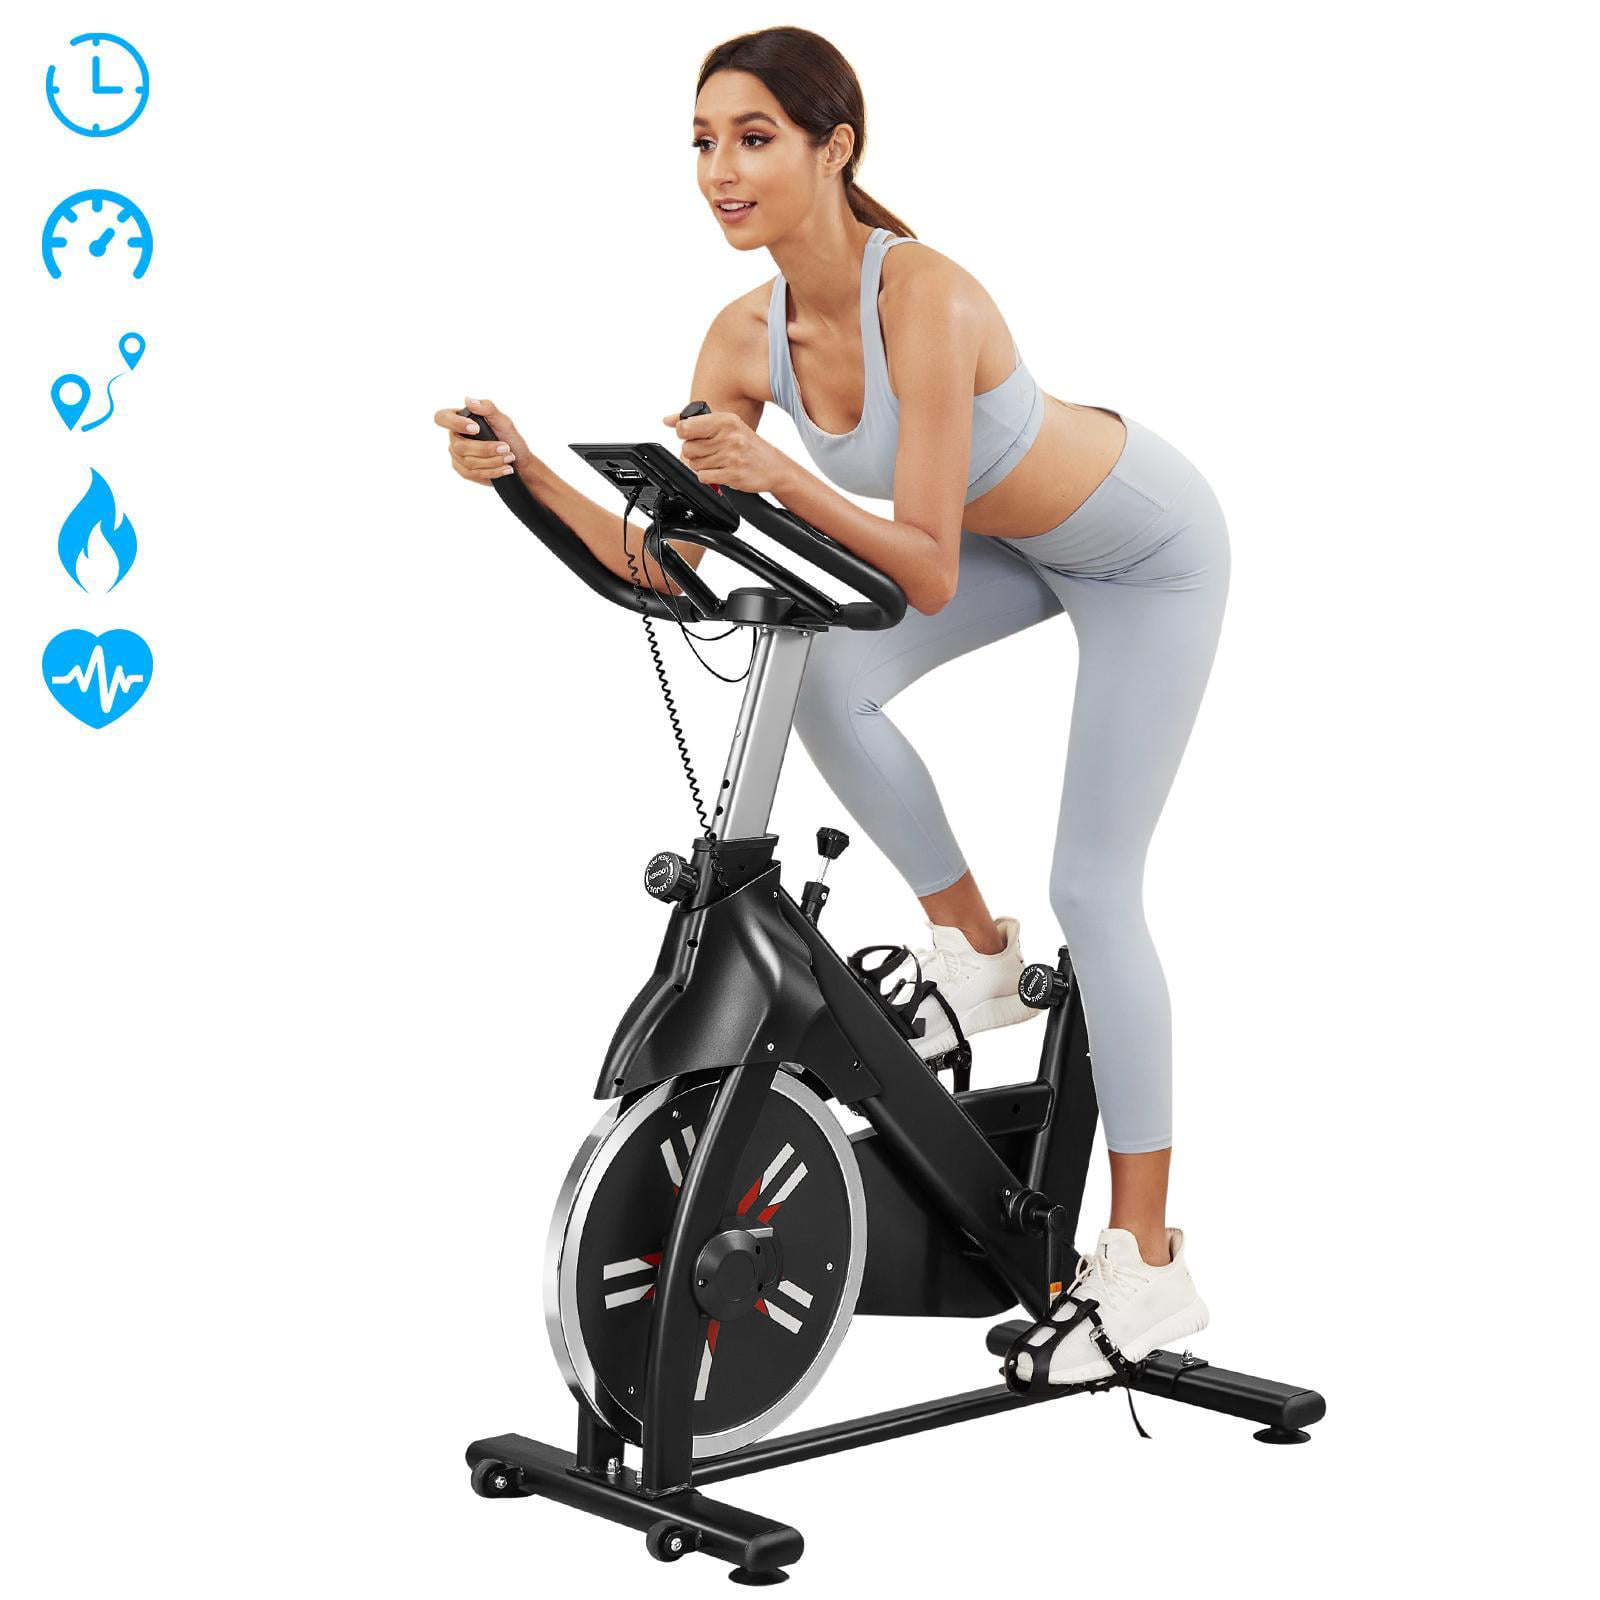 Details about   Portable Gym Fitness Workout Hand Foot Pedal Mini Exercise Bike Bicycle AU Stock 